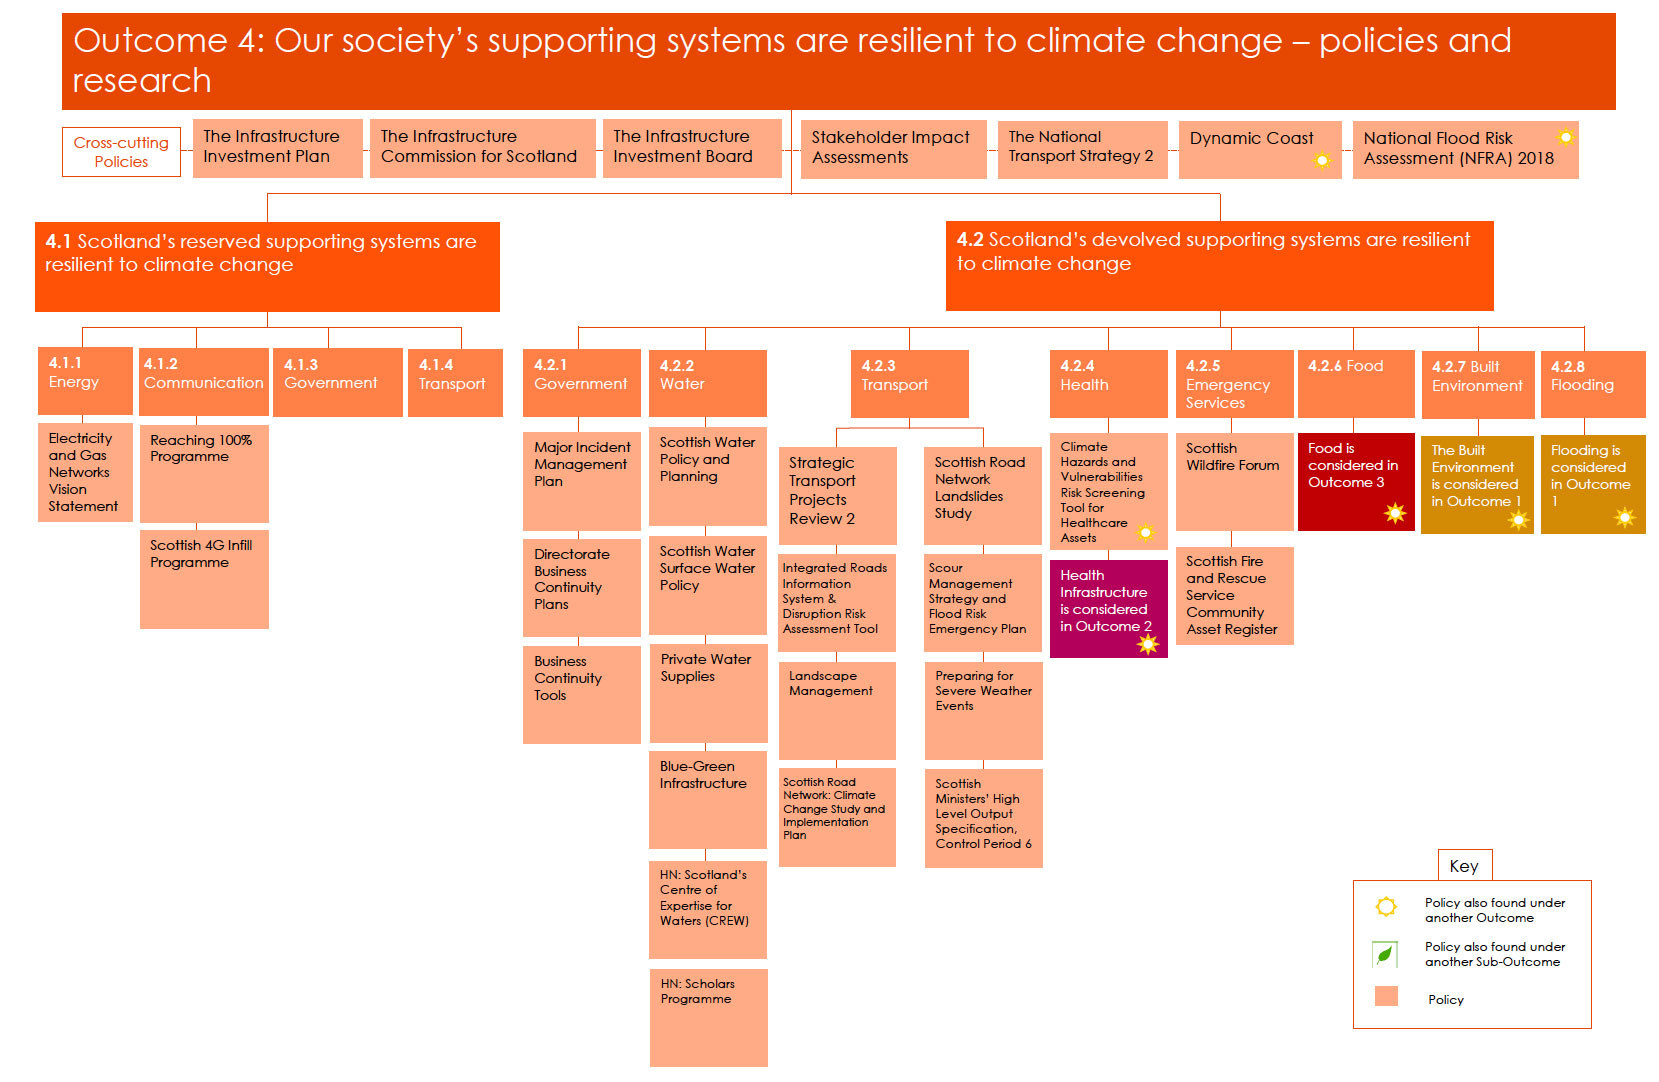 Outcome 4: Our society’s supporting systems are resilient to climate change – policies and research